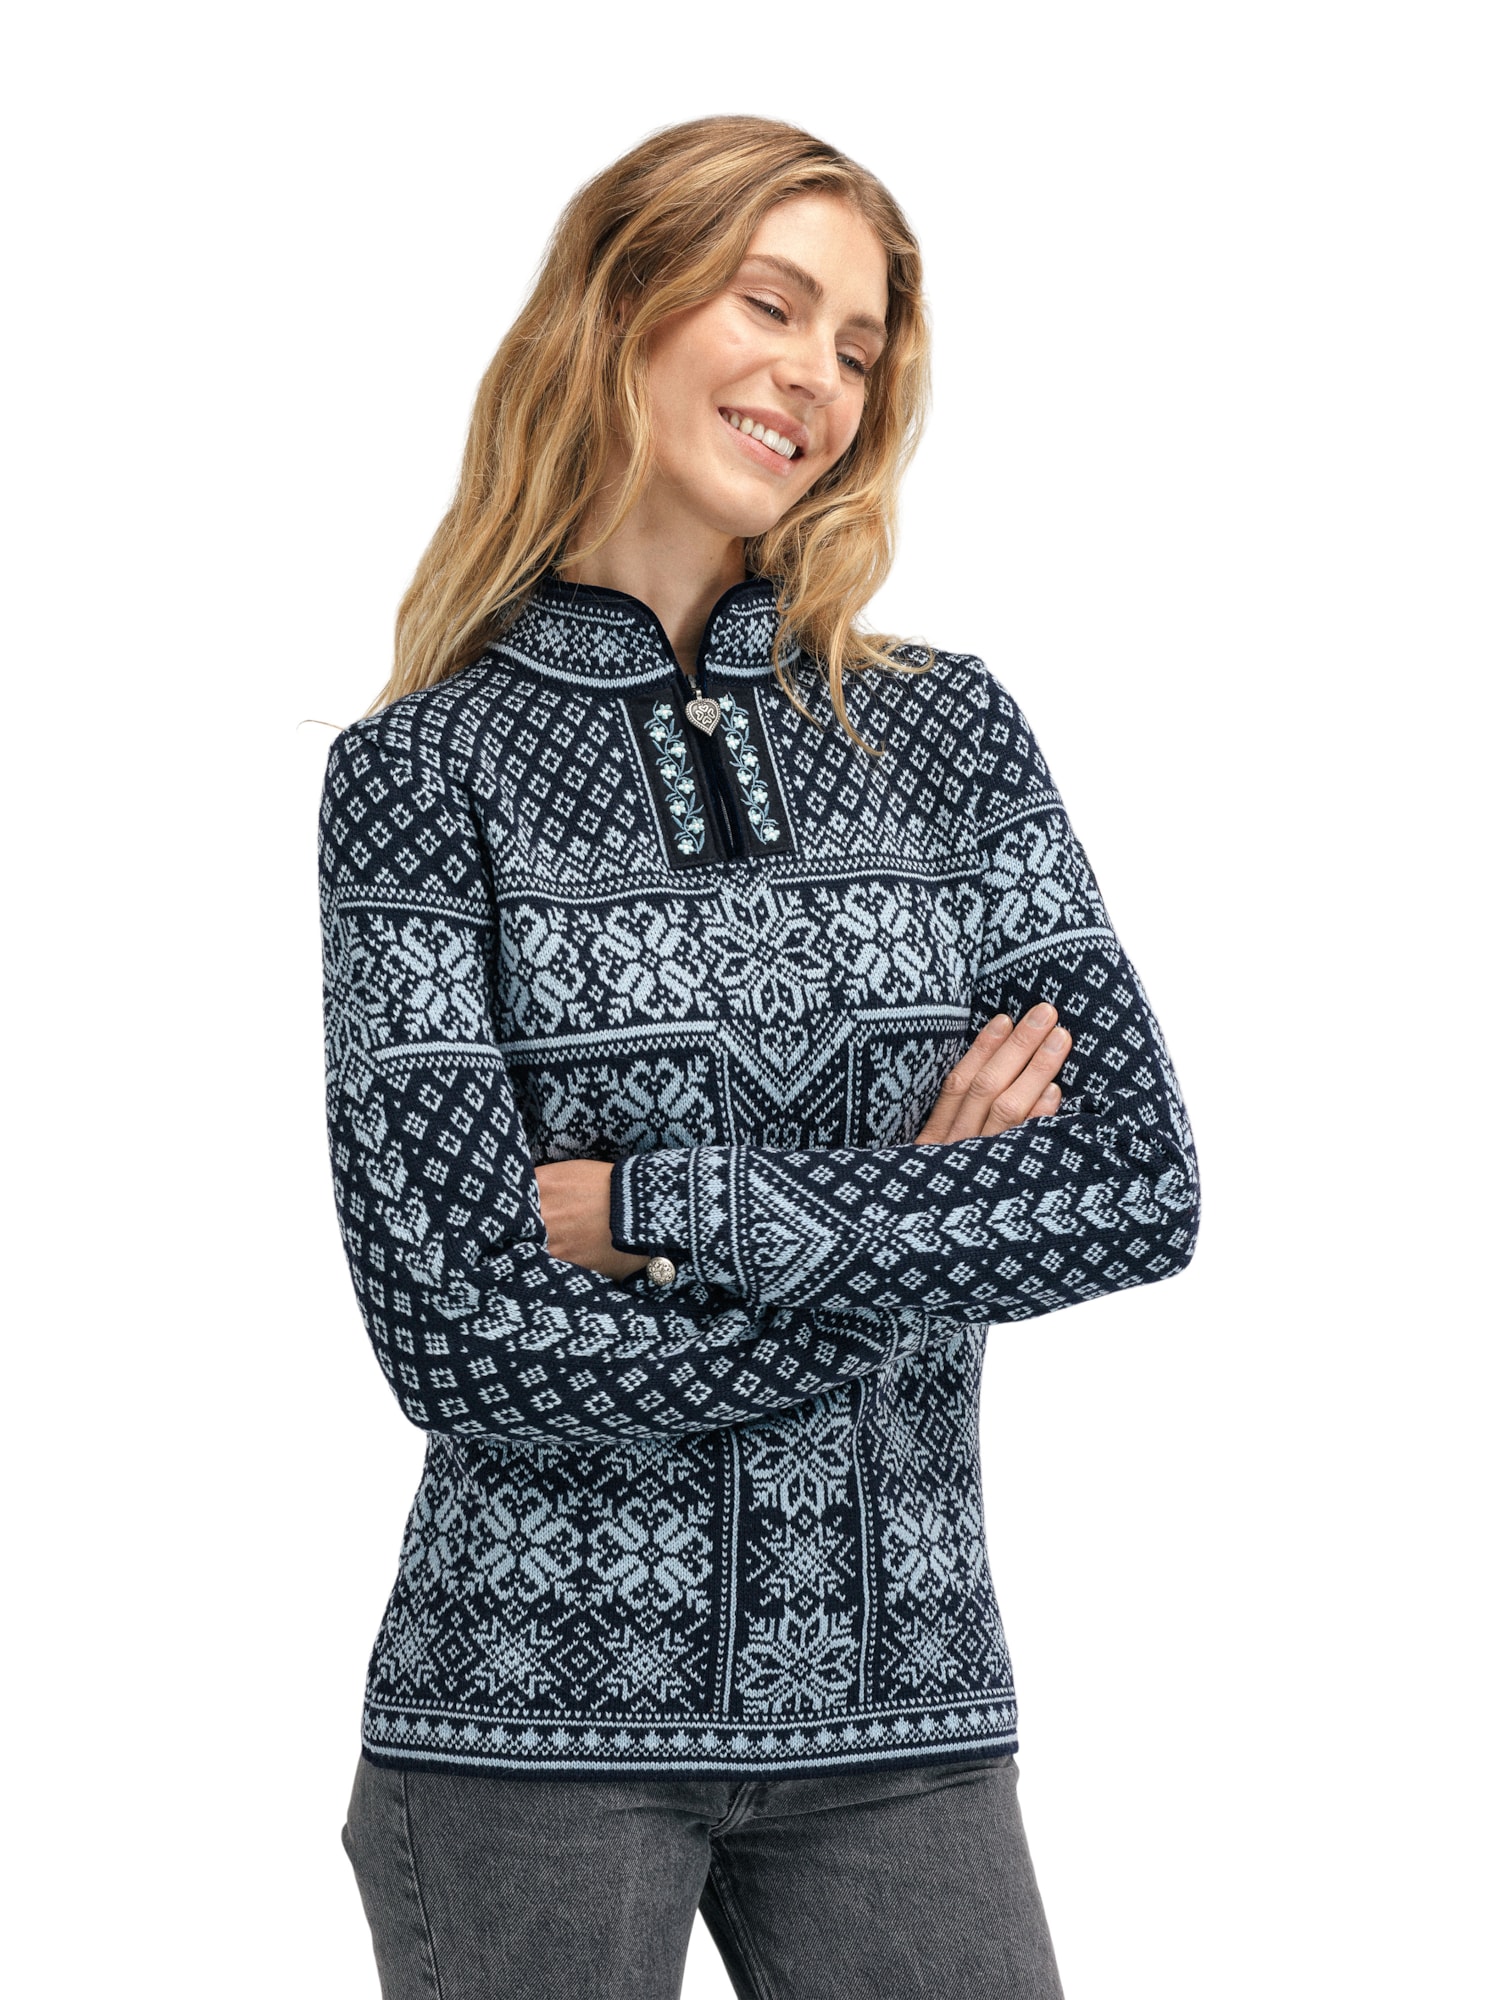 Peace Knit Sweater - Women - Navy IceBlue - Dale of Norway - Dale of Norway